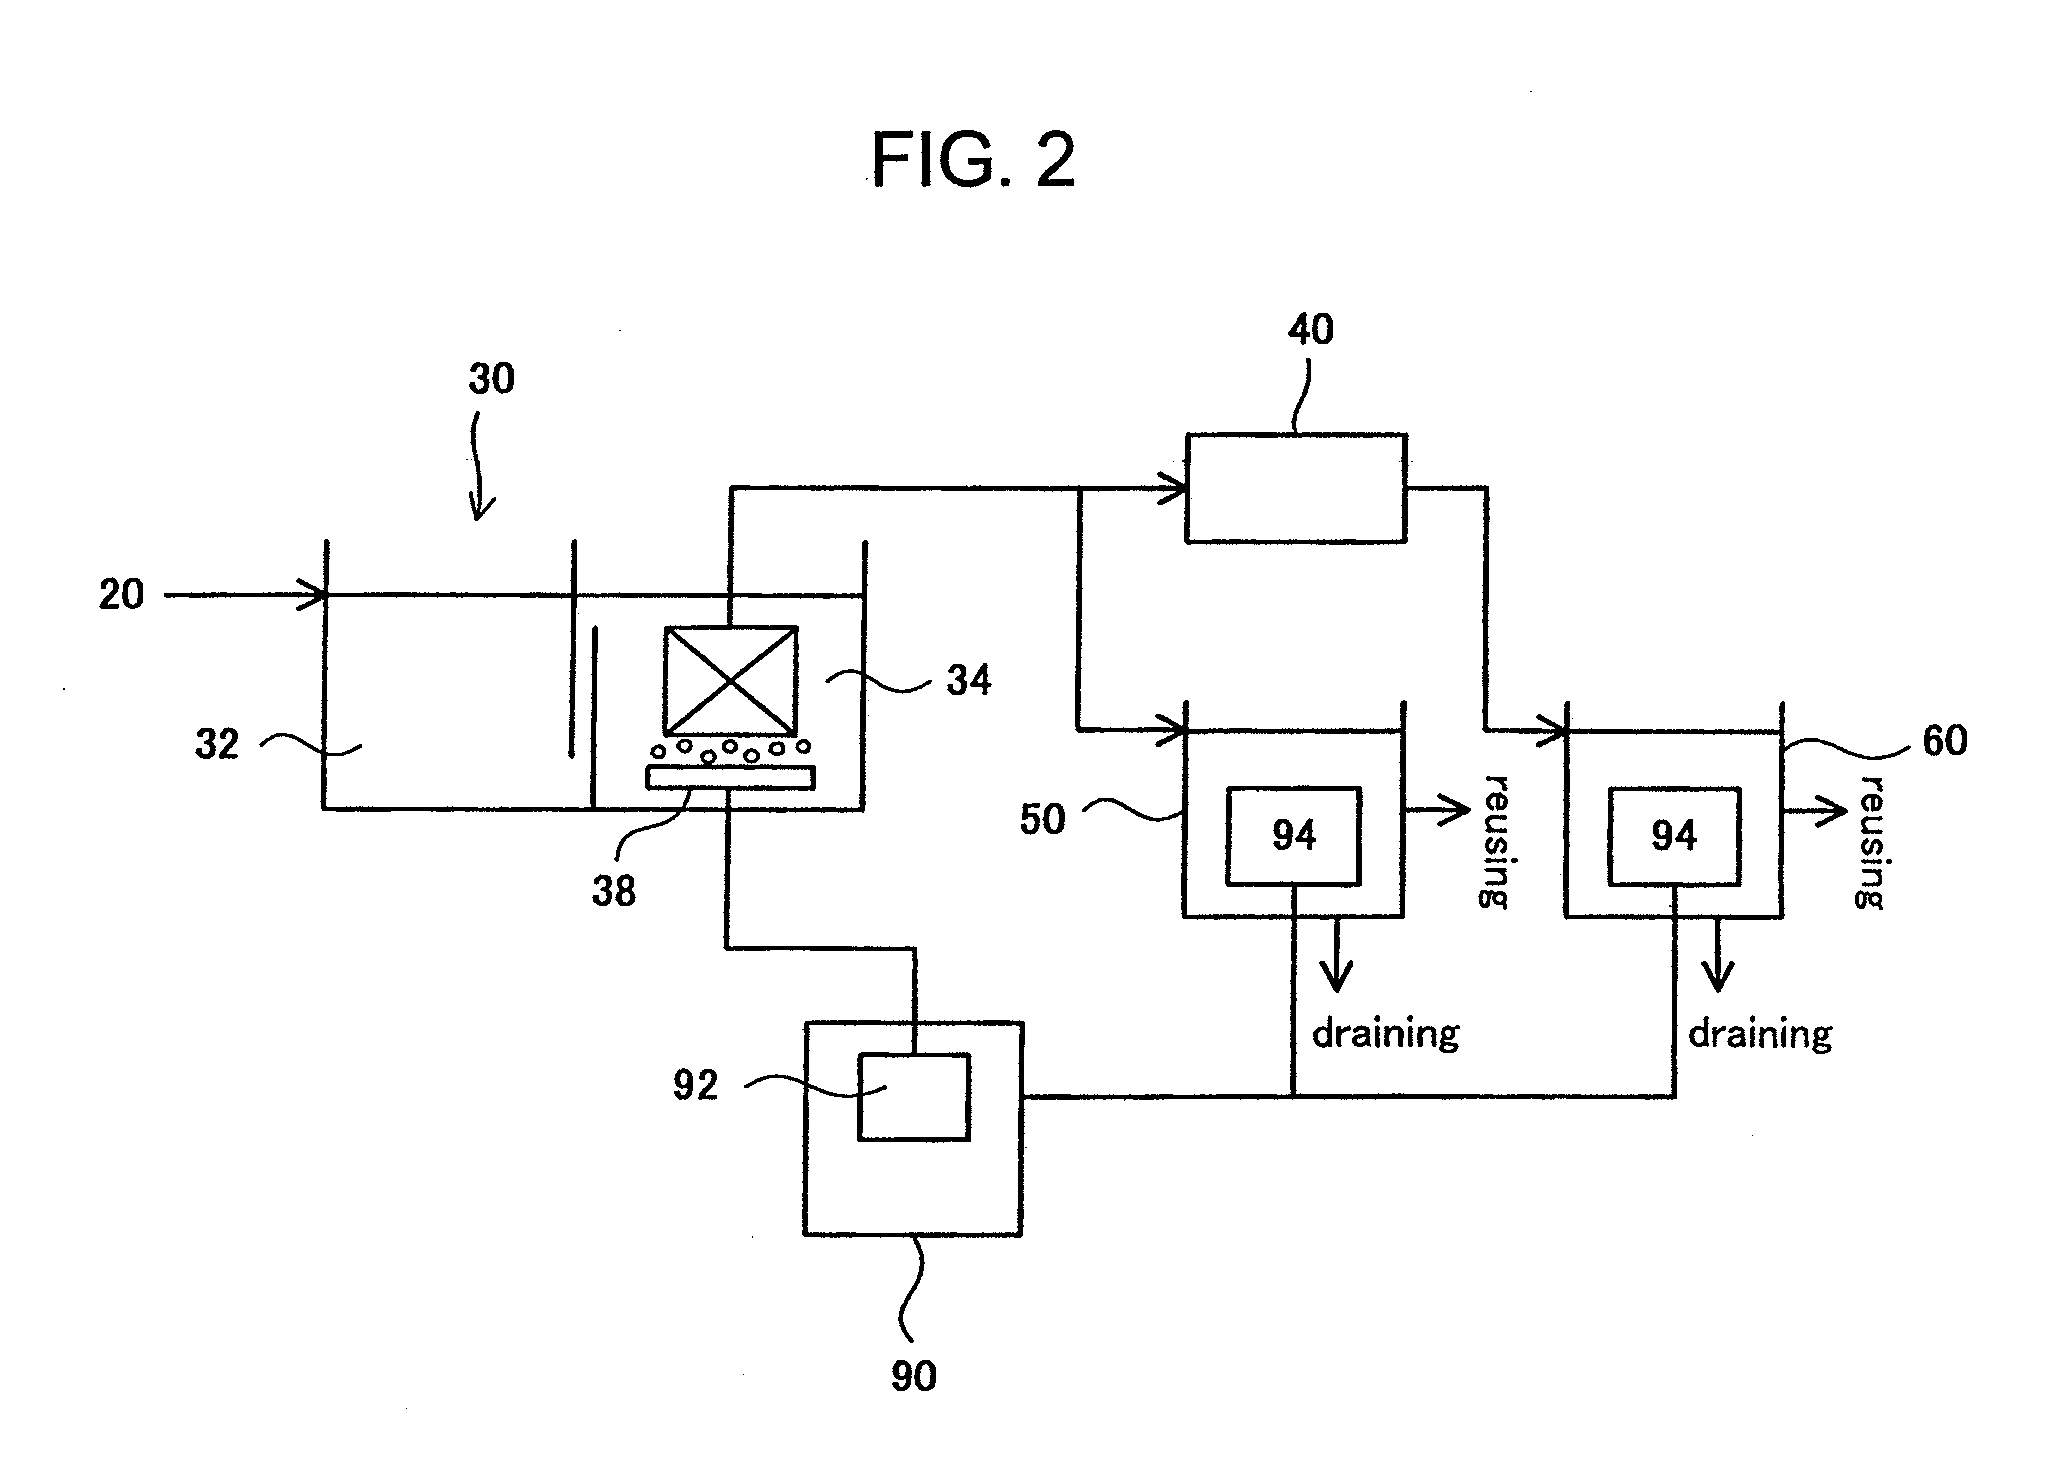 Sewage treatment apparatus and sewage reuse system